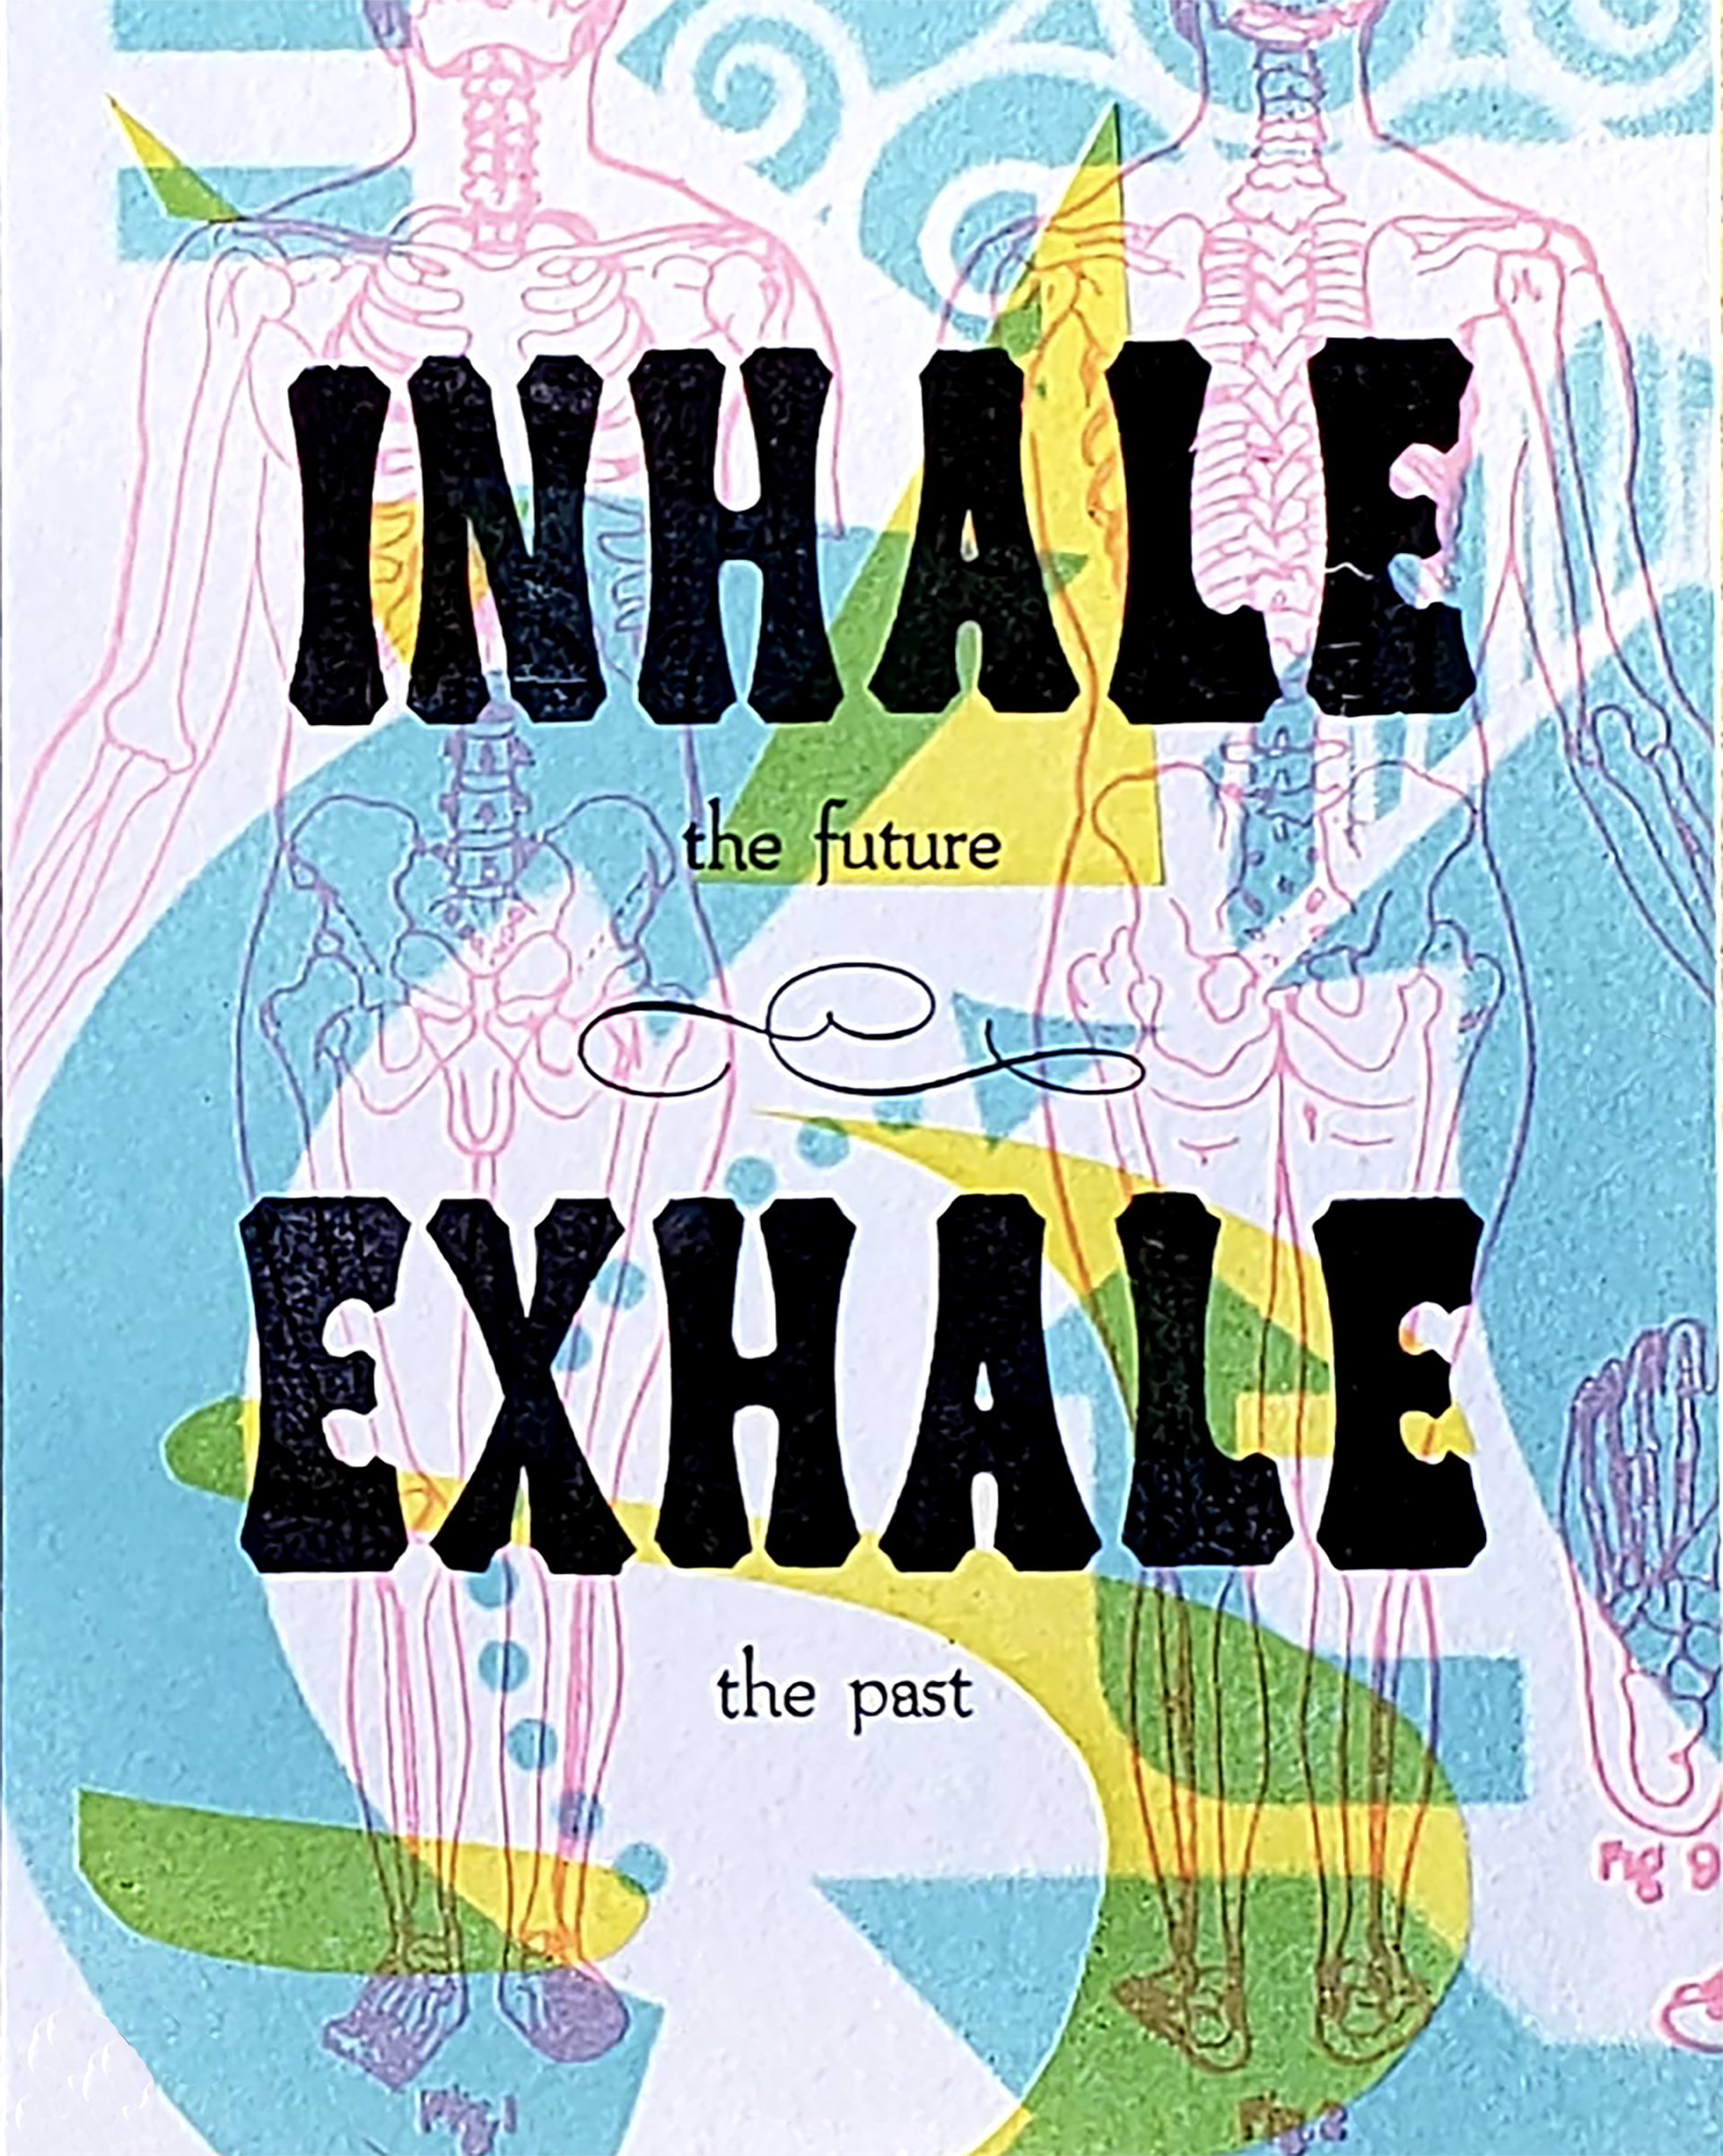 Inhale Exhale by Cindy Iverson